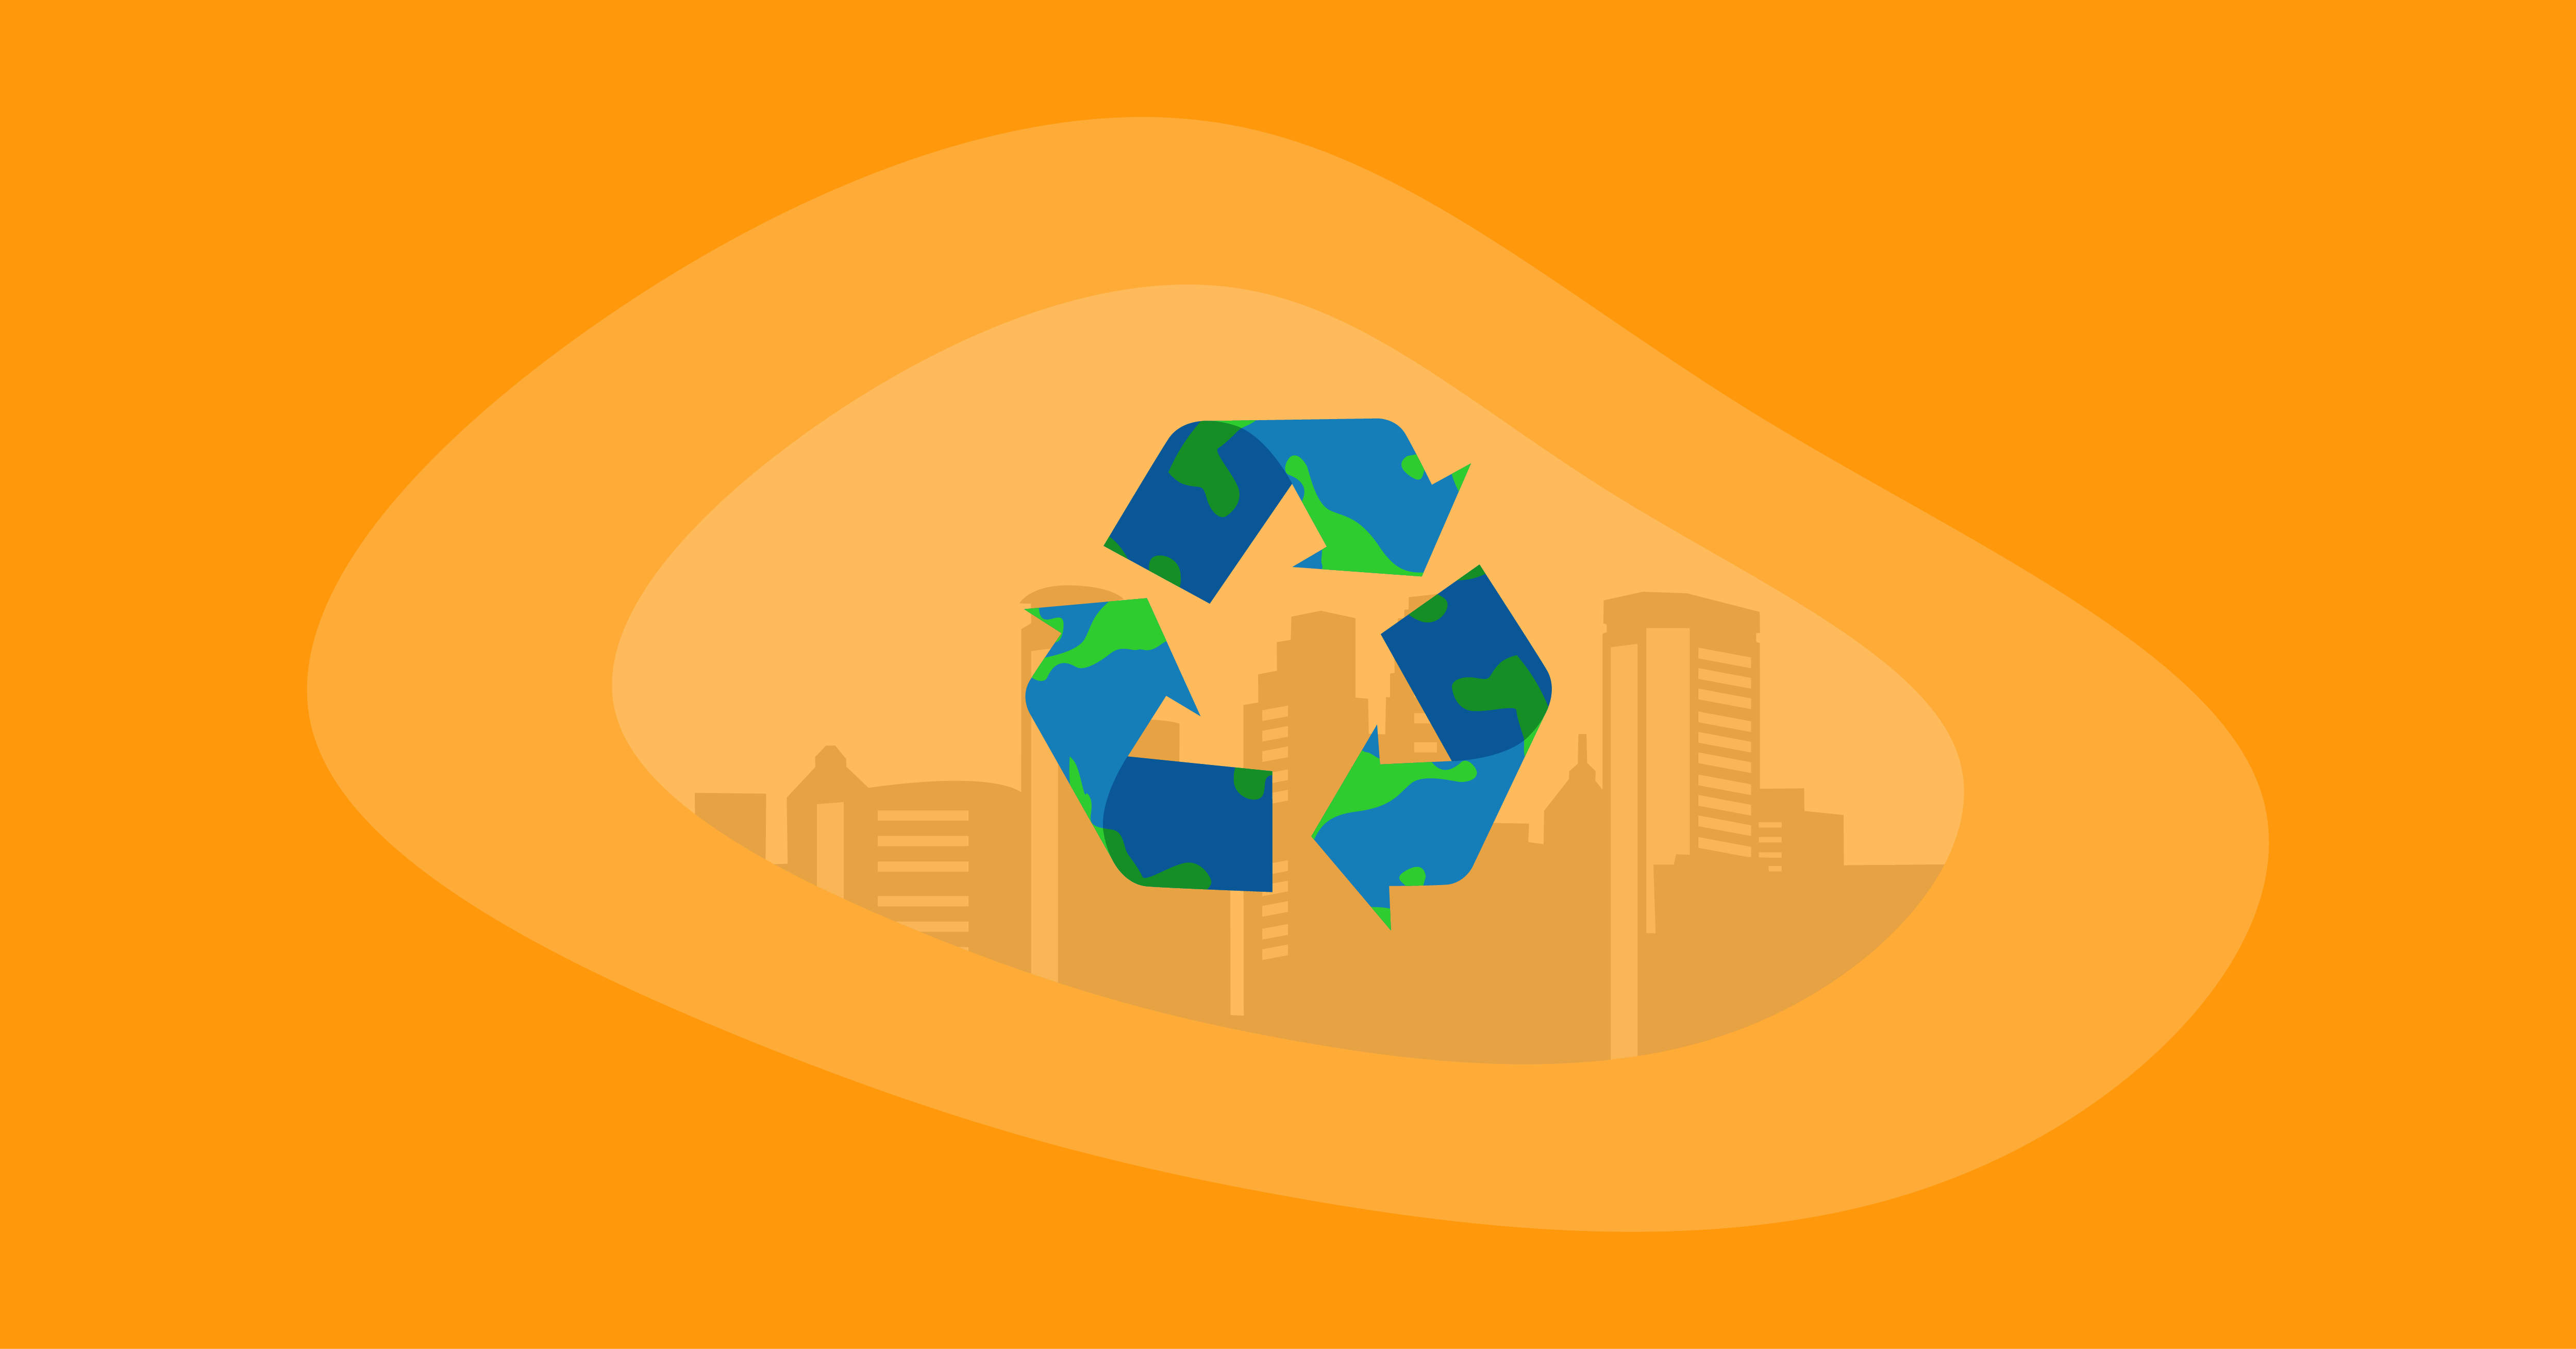 Illustration of the recycling sign